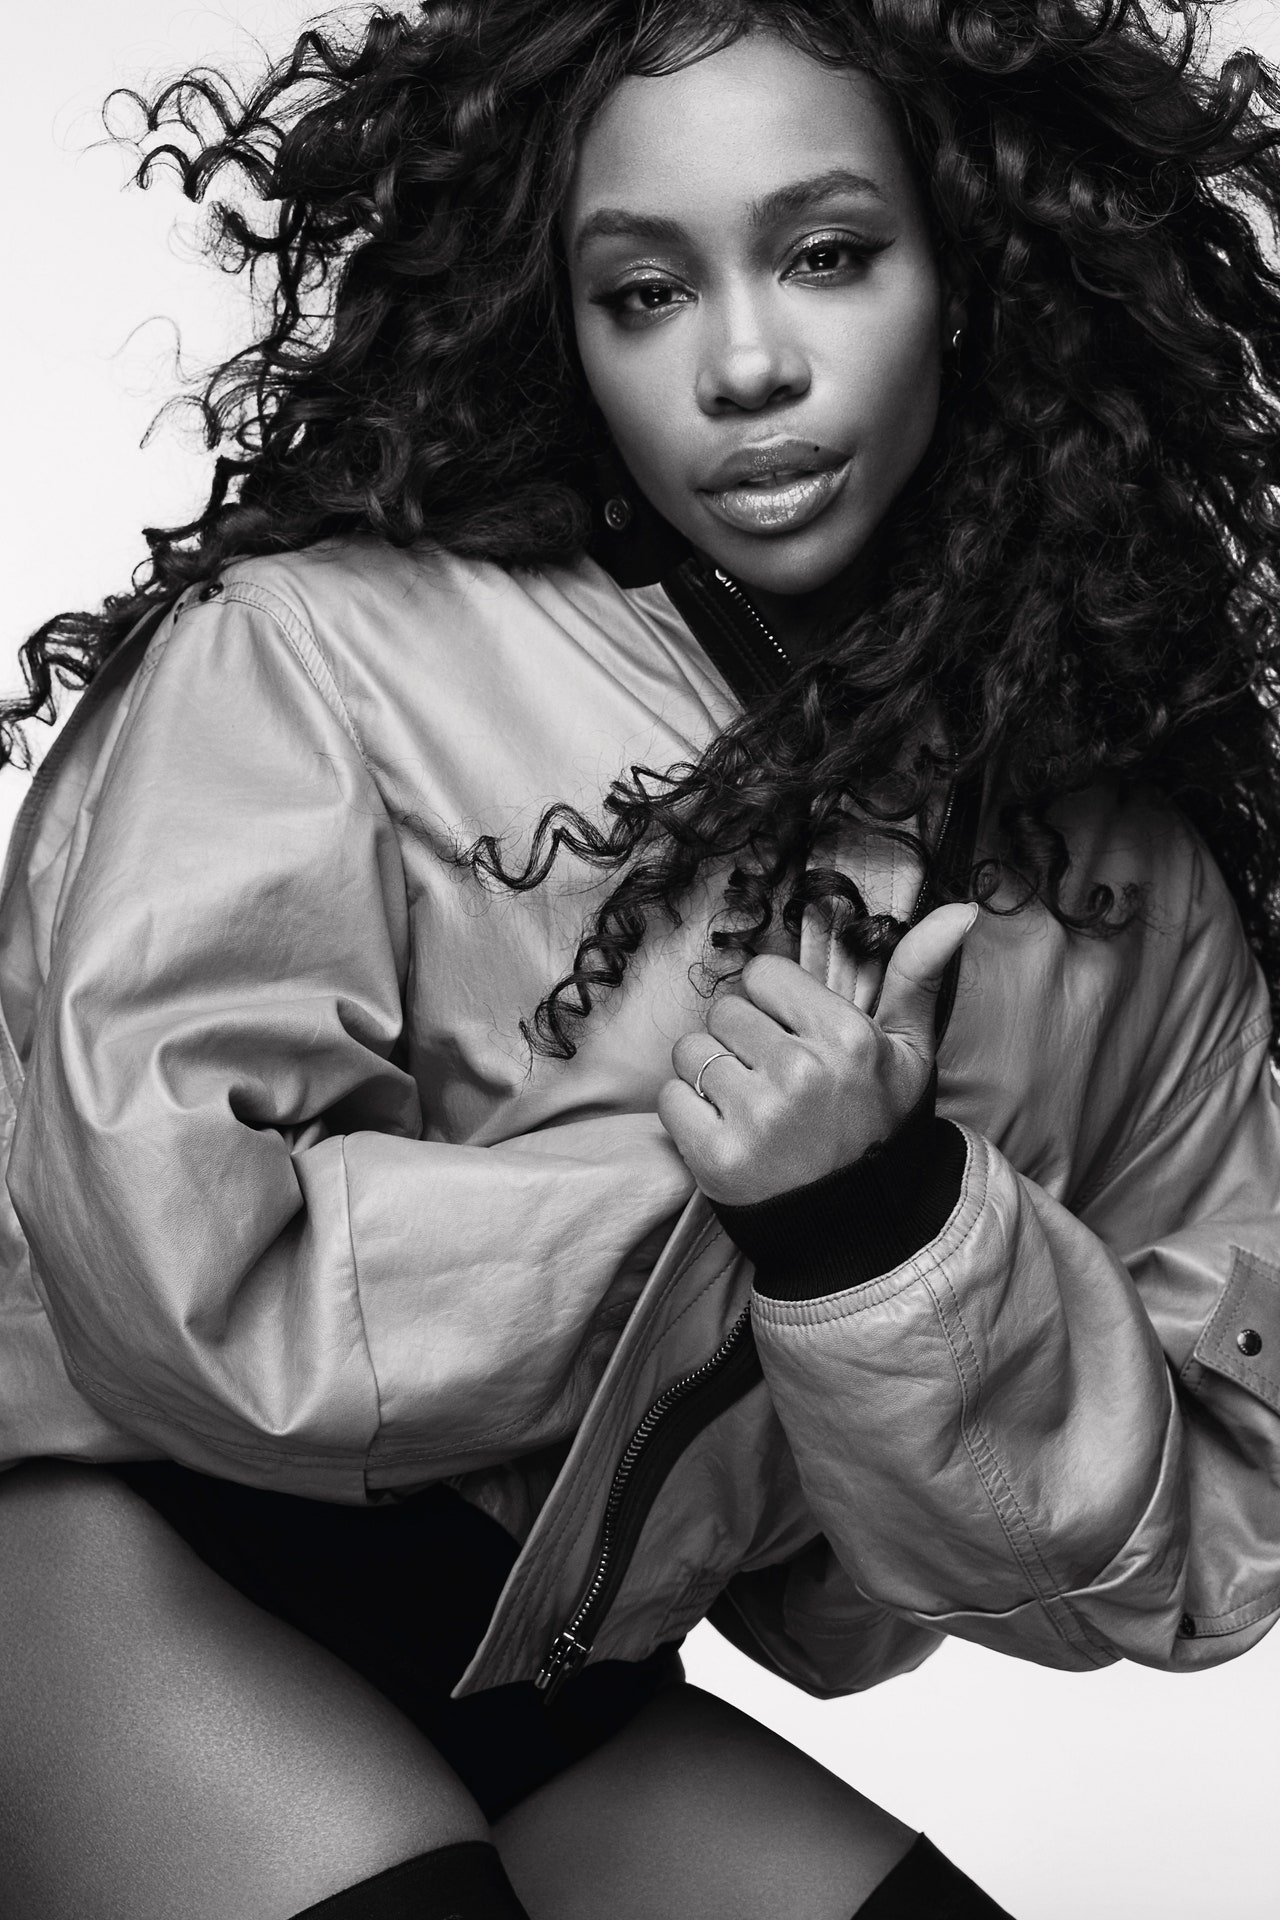 SZA: The Consequence Cover Story